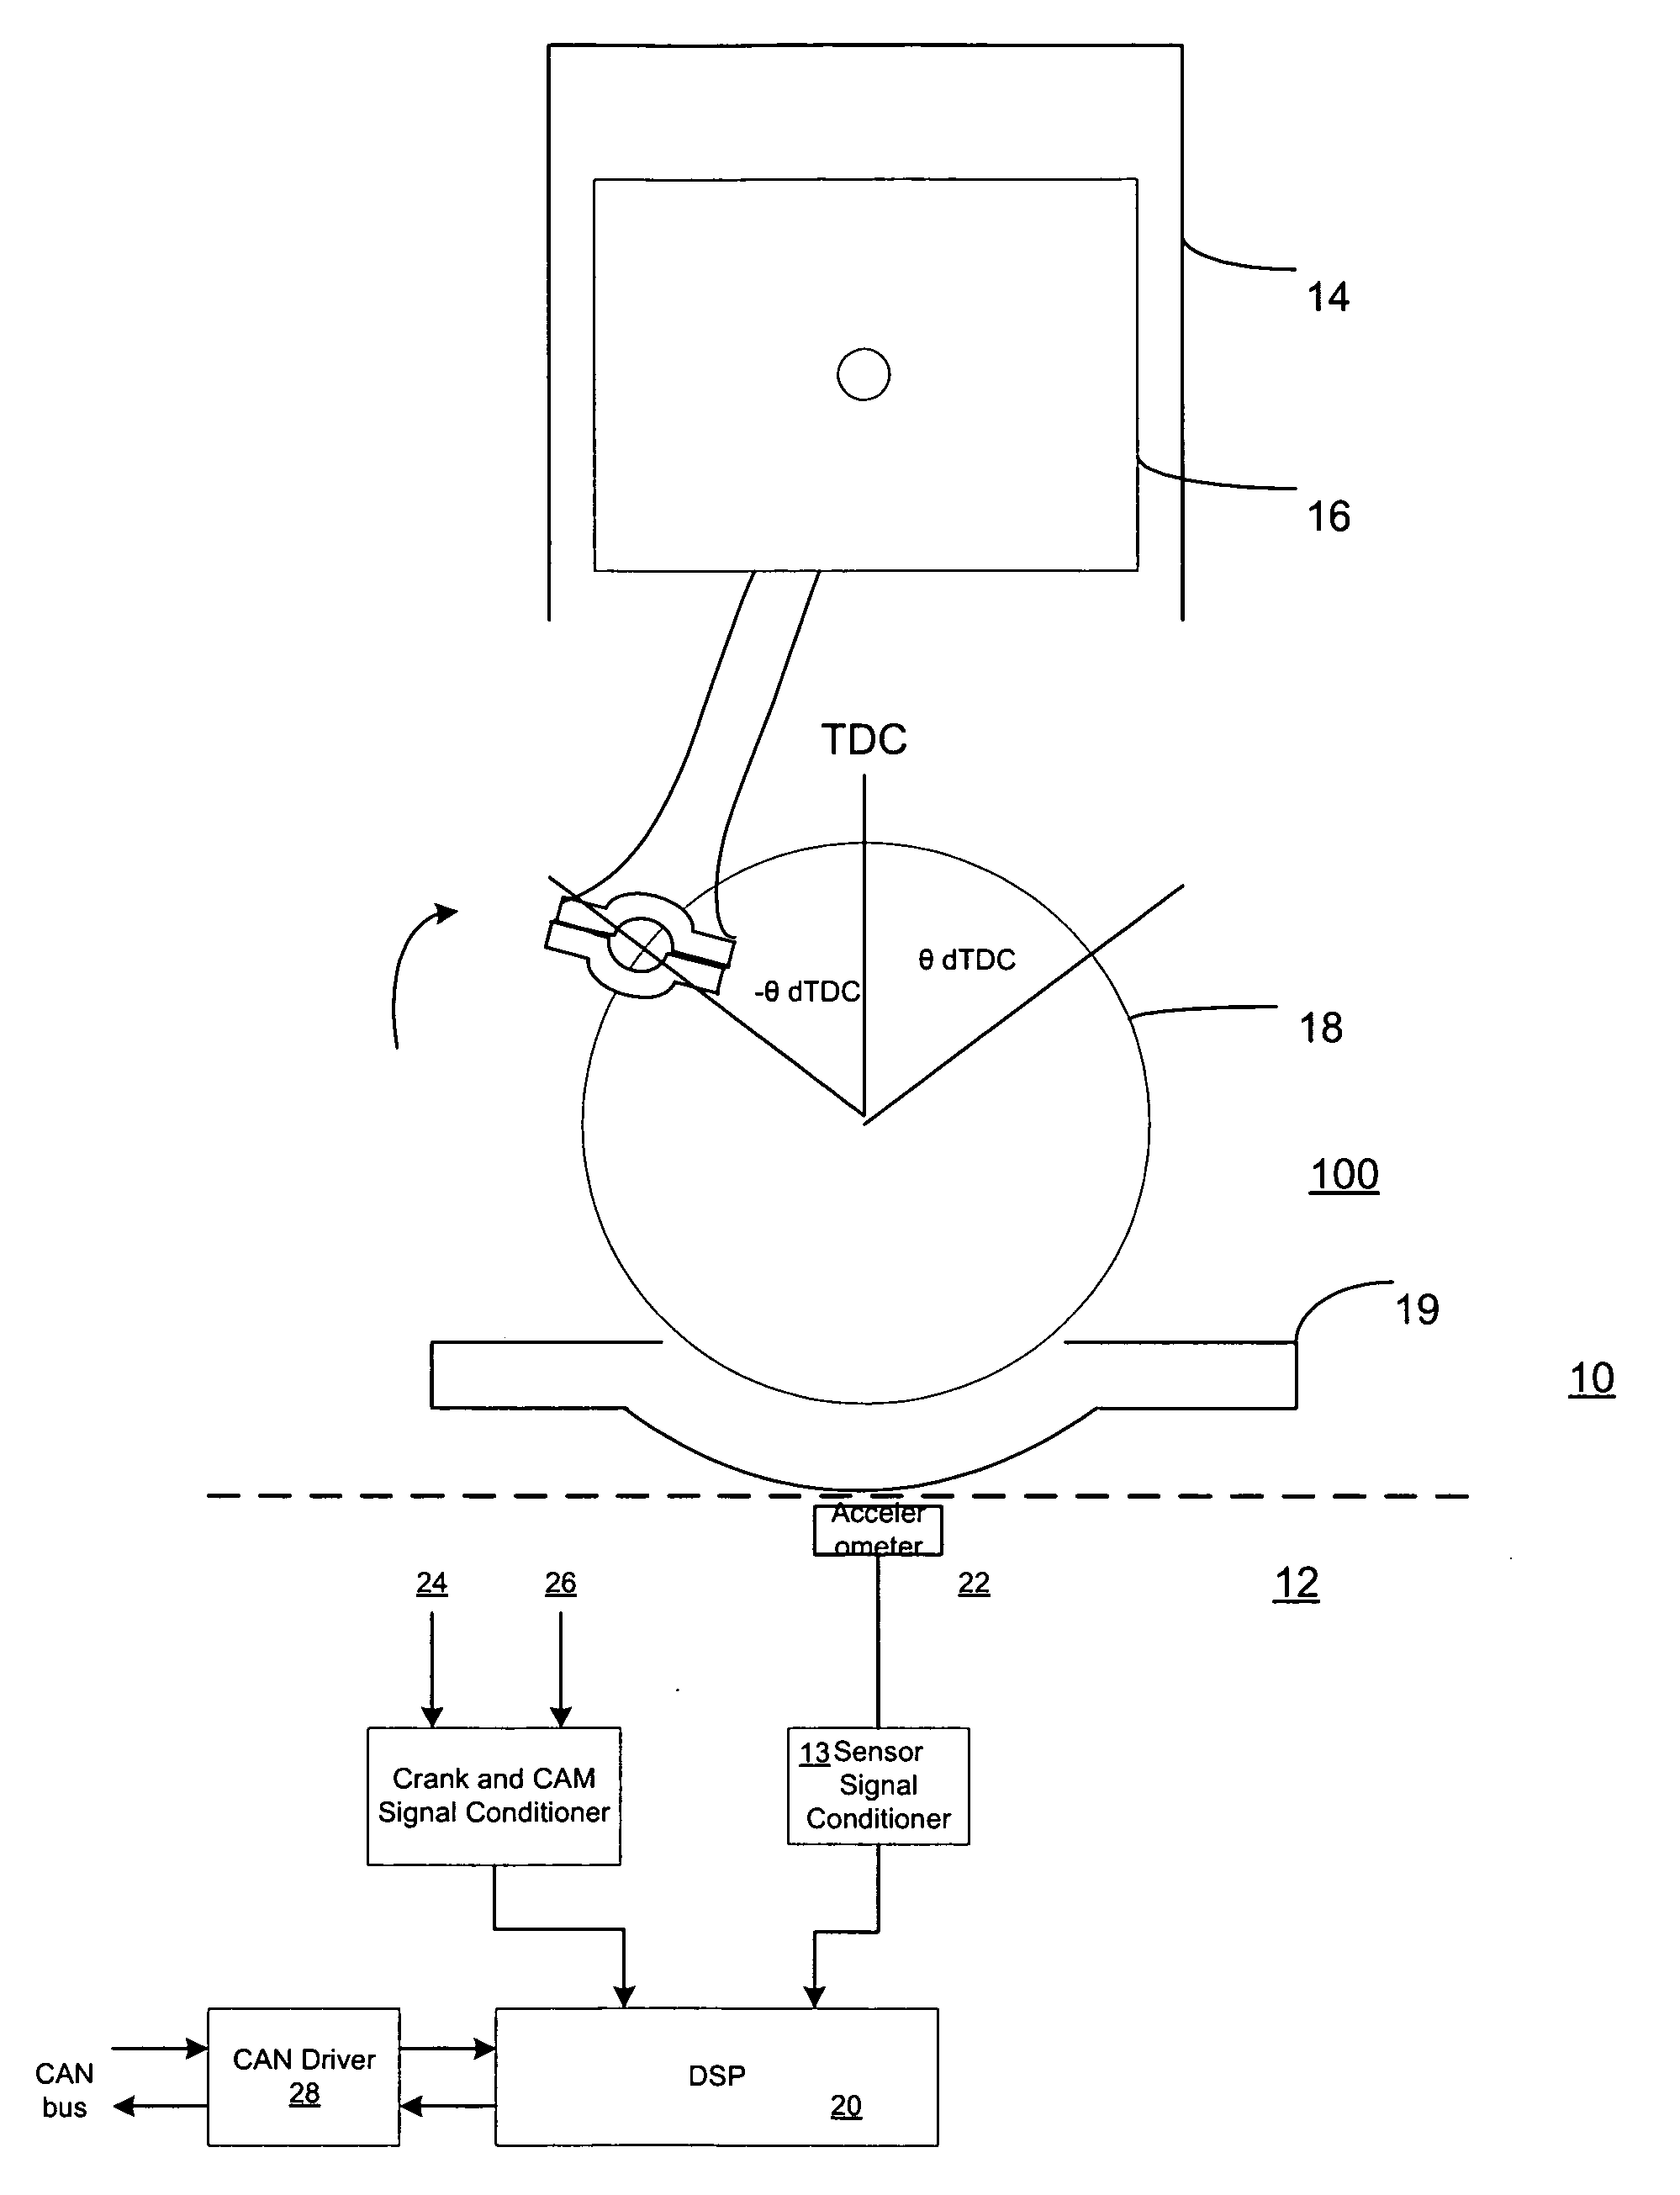 System and method for processing an accelerometer signal to assist in combustion quality control in an internal combustion engine